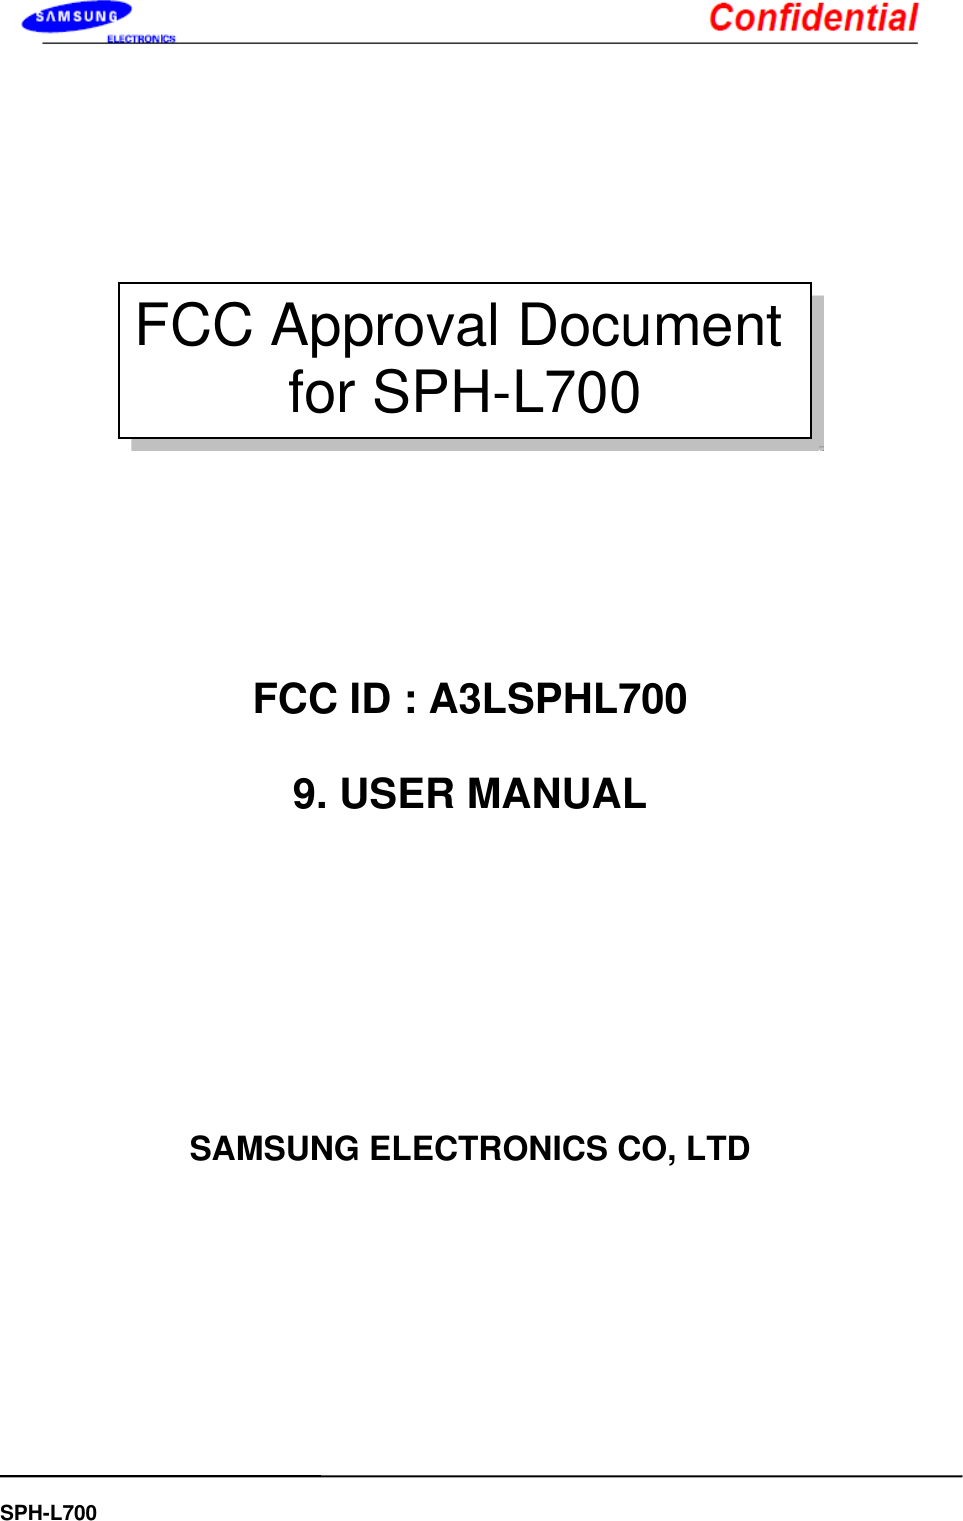    SPH-L700              FCC ID : A3LSPHL700  9. USER MANUAL         SAMSUNG ELECTRONICS CO, LTD     FCC Approval Document for SPH-L700 